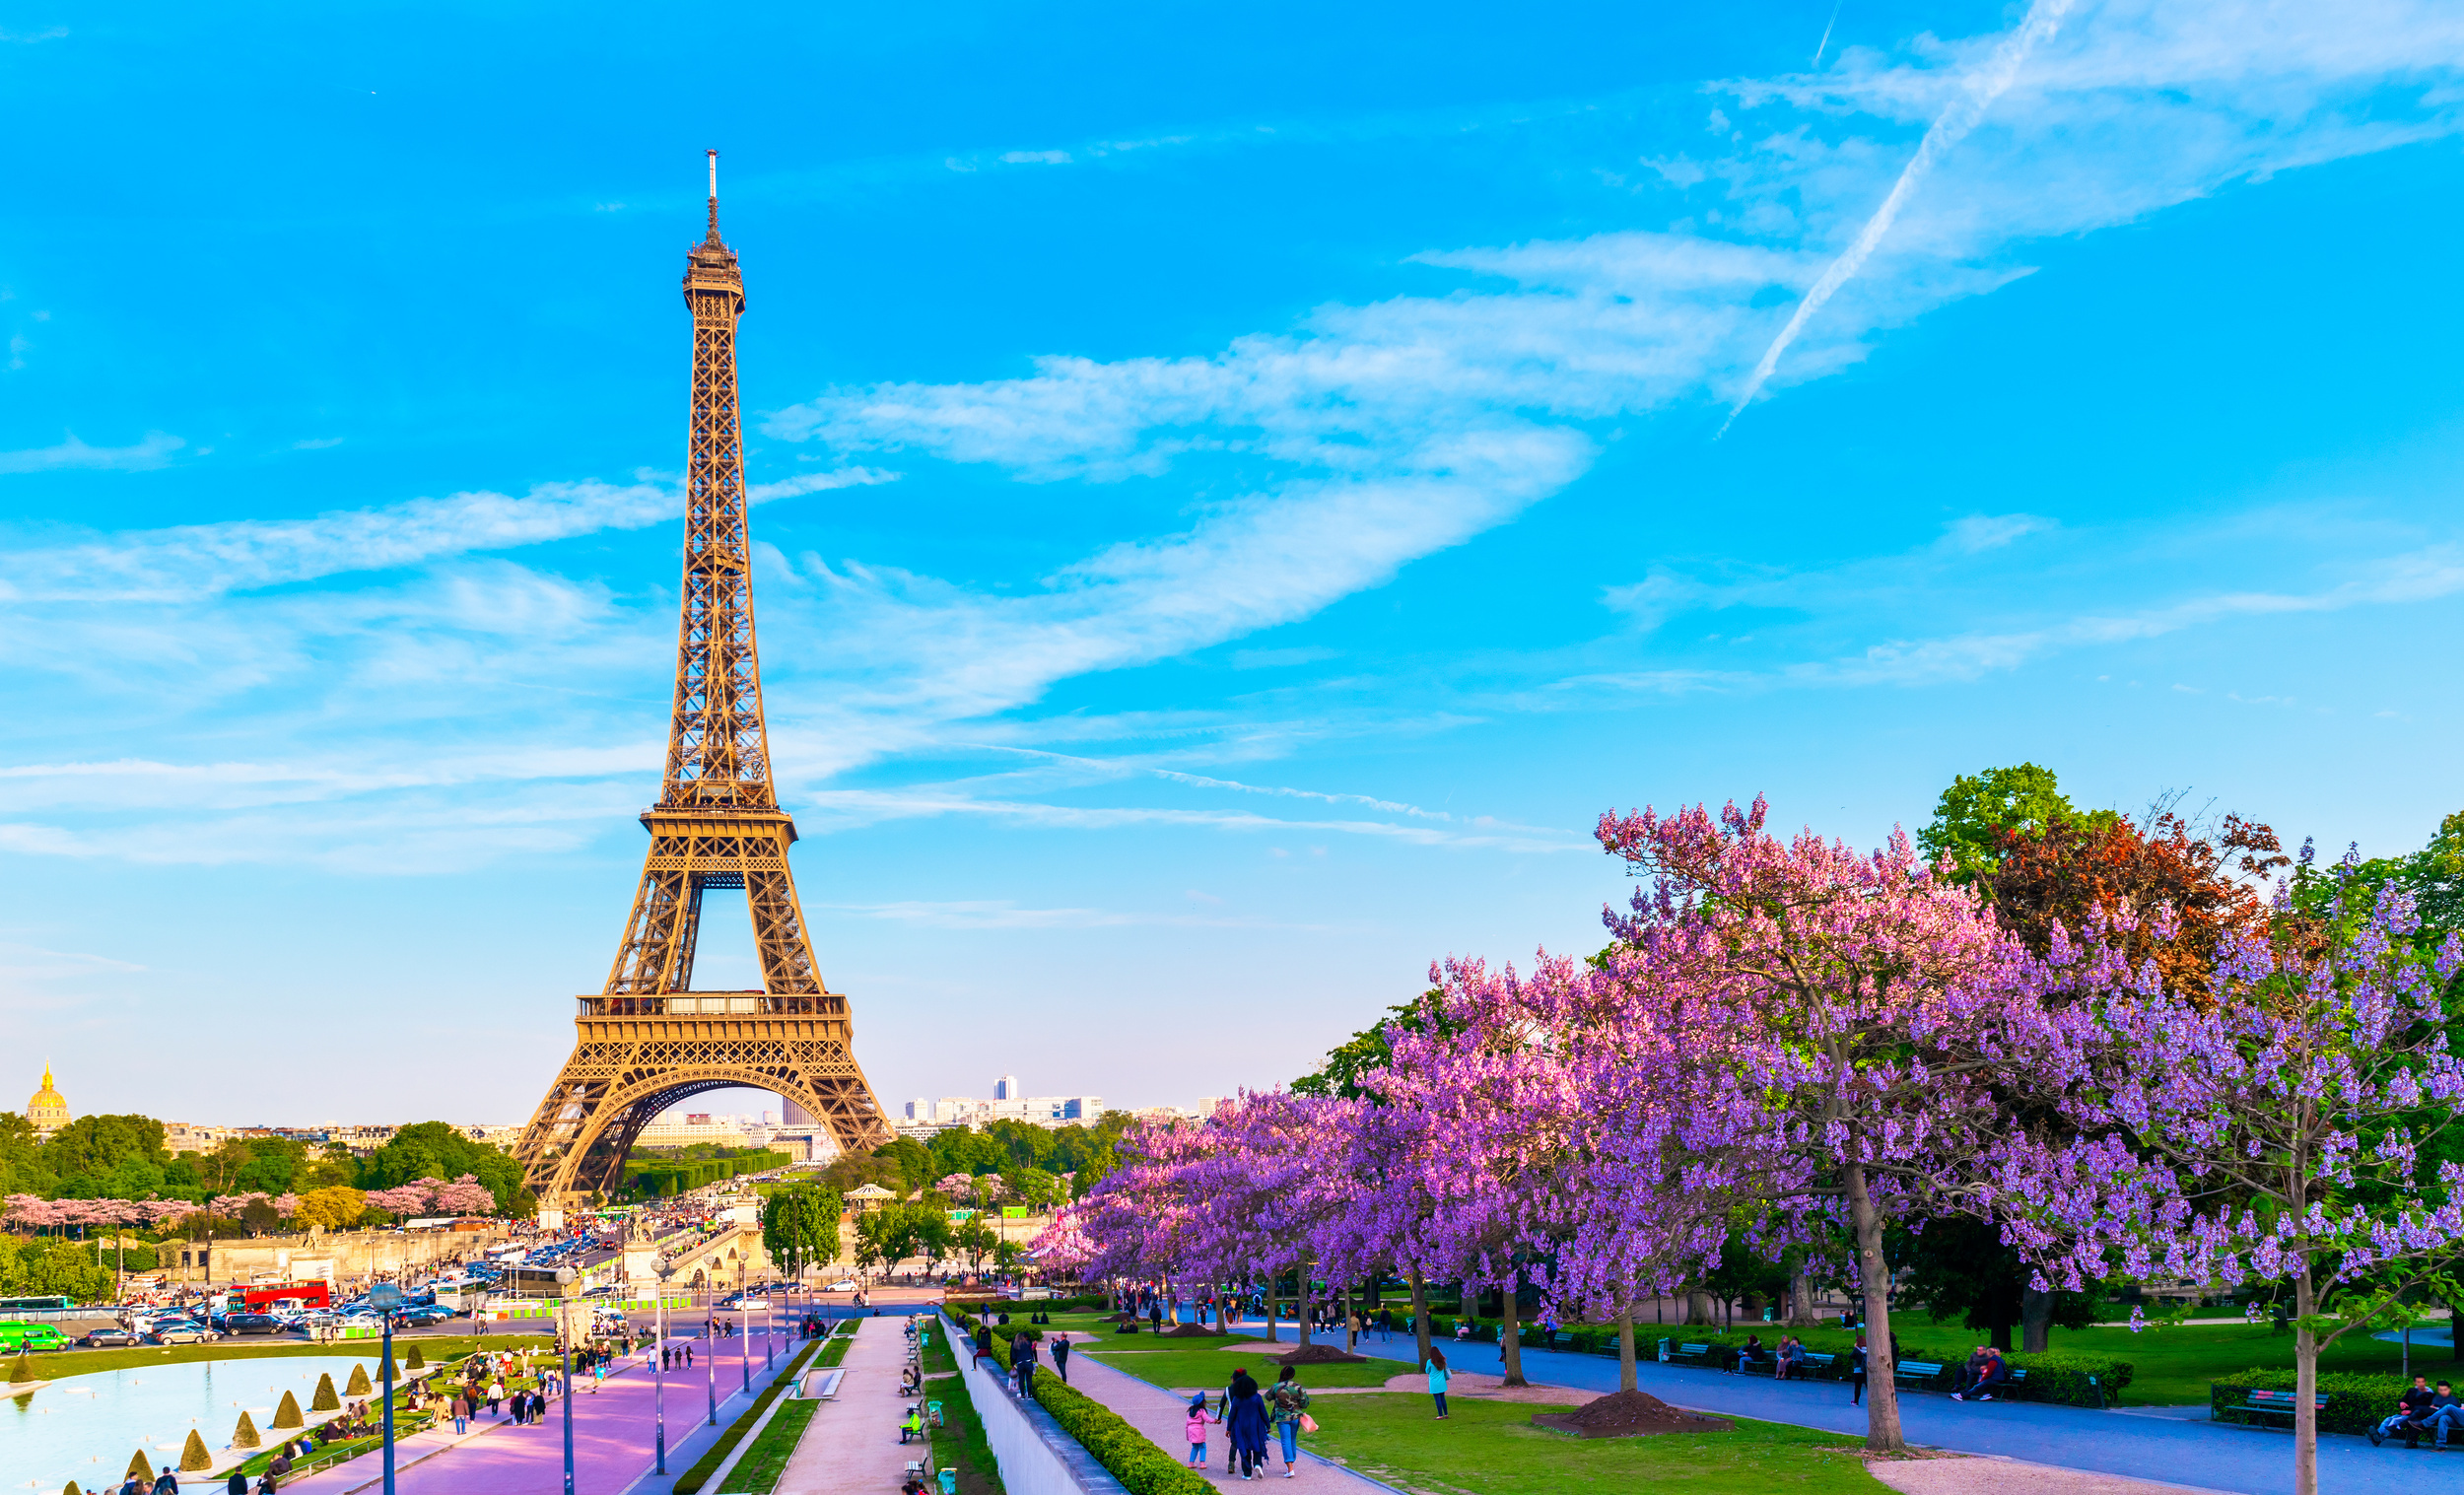 <p>The city of love and light is also a floral town in the spring. Cherry blossoms, magnolias, wisteria, and roses cover the various arrondissements. Make sure to pack your allergy meds if you have a pollen aversion!</p><p><a href='https://www.msn.com/en-us/community/channel/vid-cj9pqbr0vn9in2b6ddcd8sfgpfq6x6utp44fssrv6mc2gtybw0us'>Follow us on MSN to see more of our exclusive lifestyle content.</a></p>